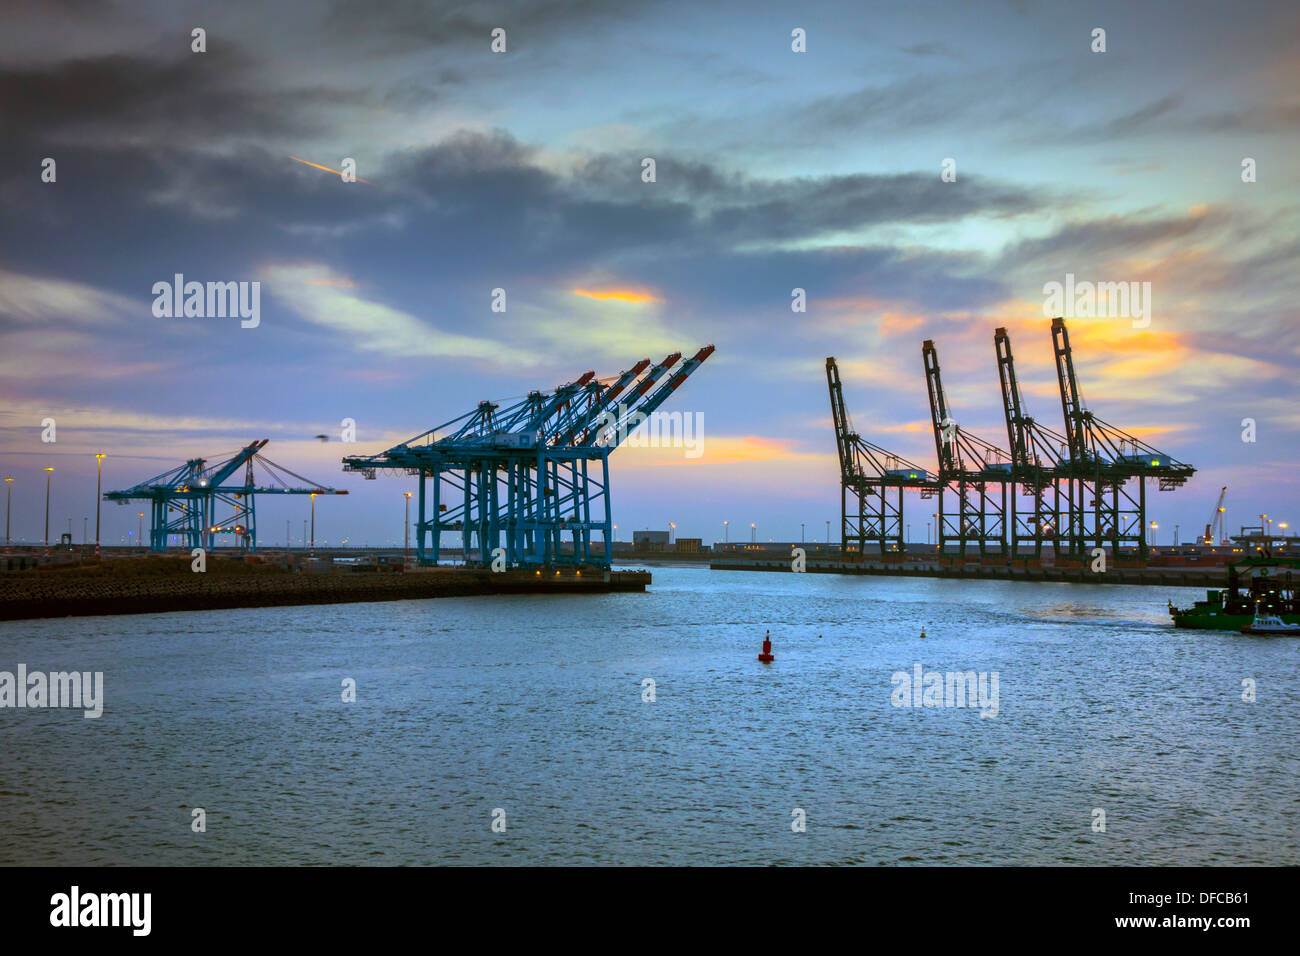 Zeebrugge port and container terminal, commerce, with ships, cranes and containers Stock Photo